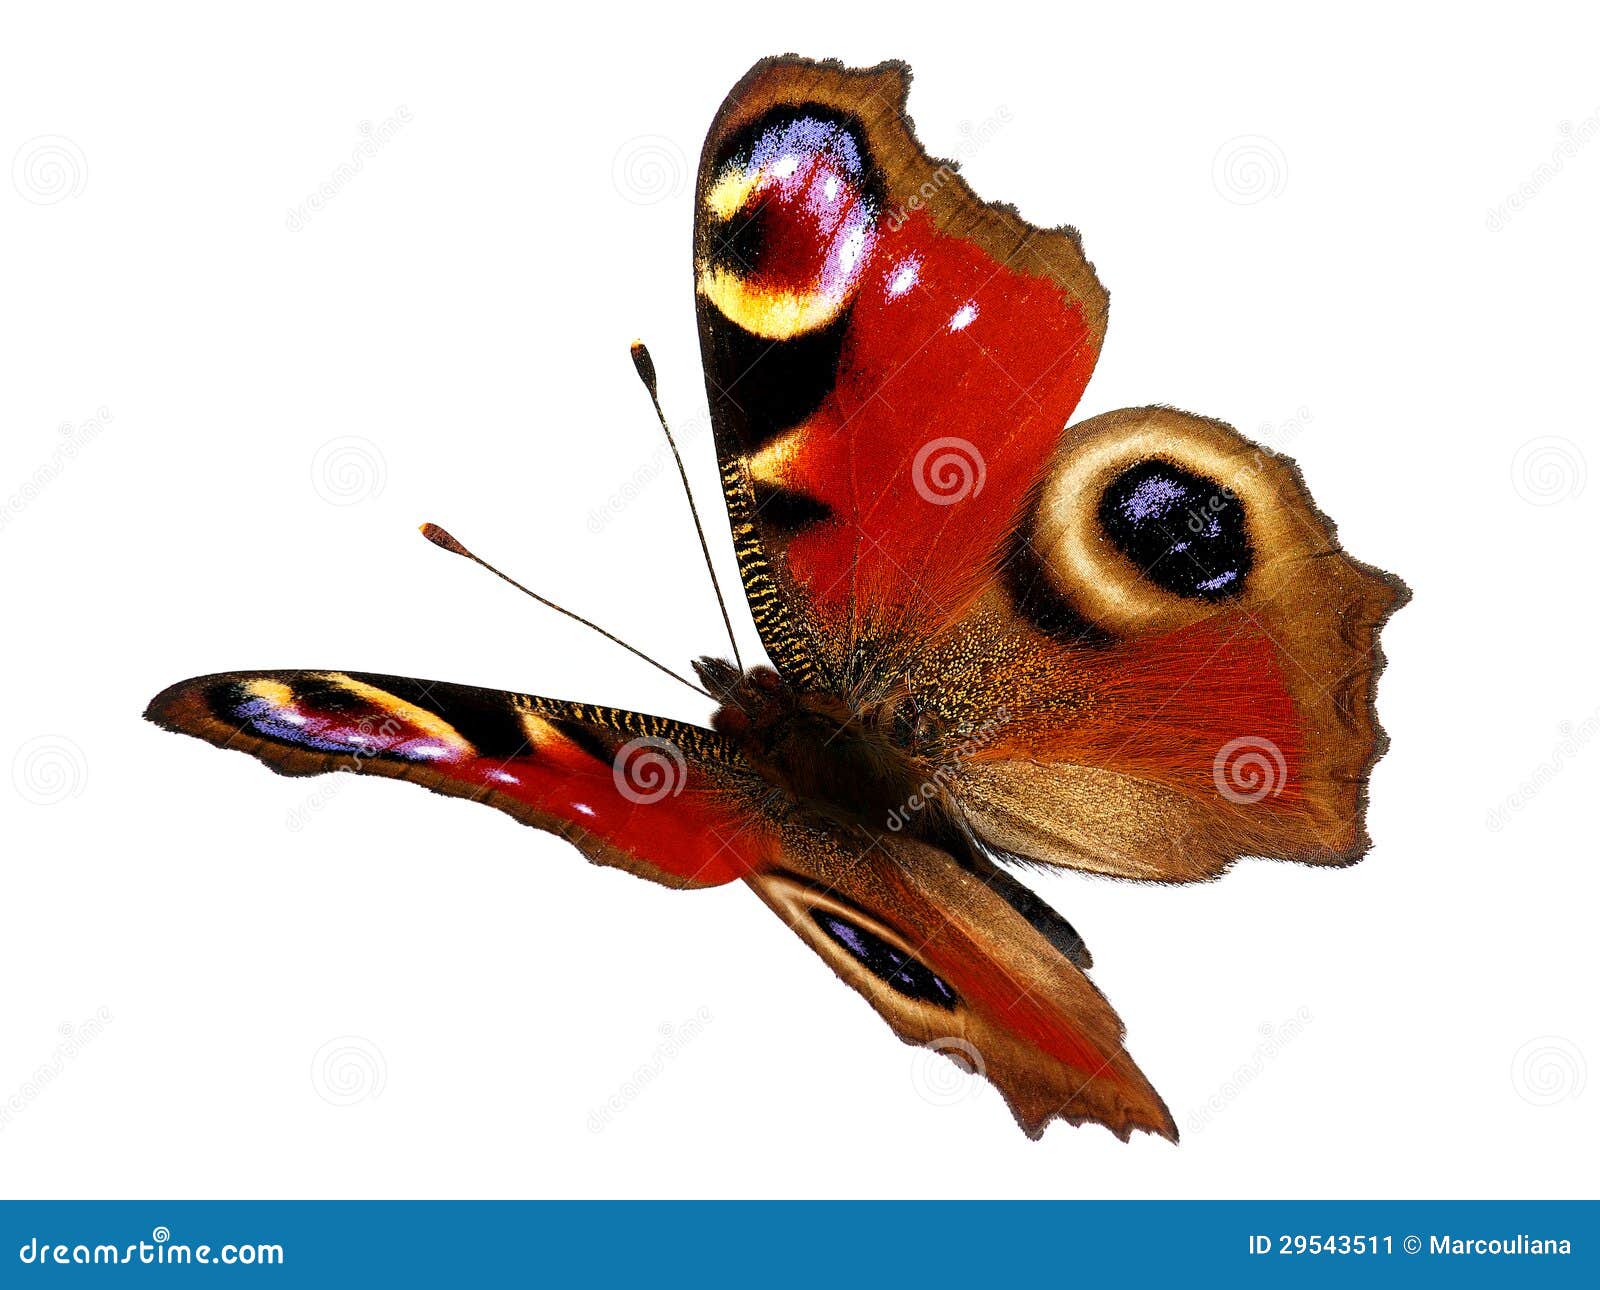 Peacock Butterfly In Flight (Inachis Io) Stock Image - Image: 29543511